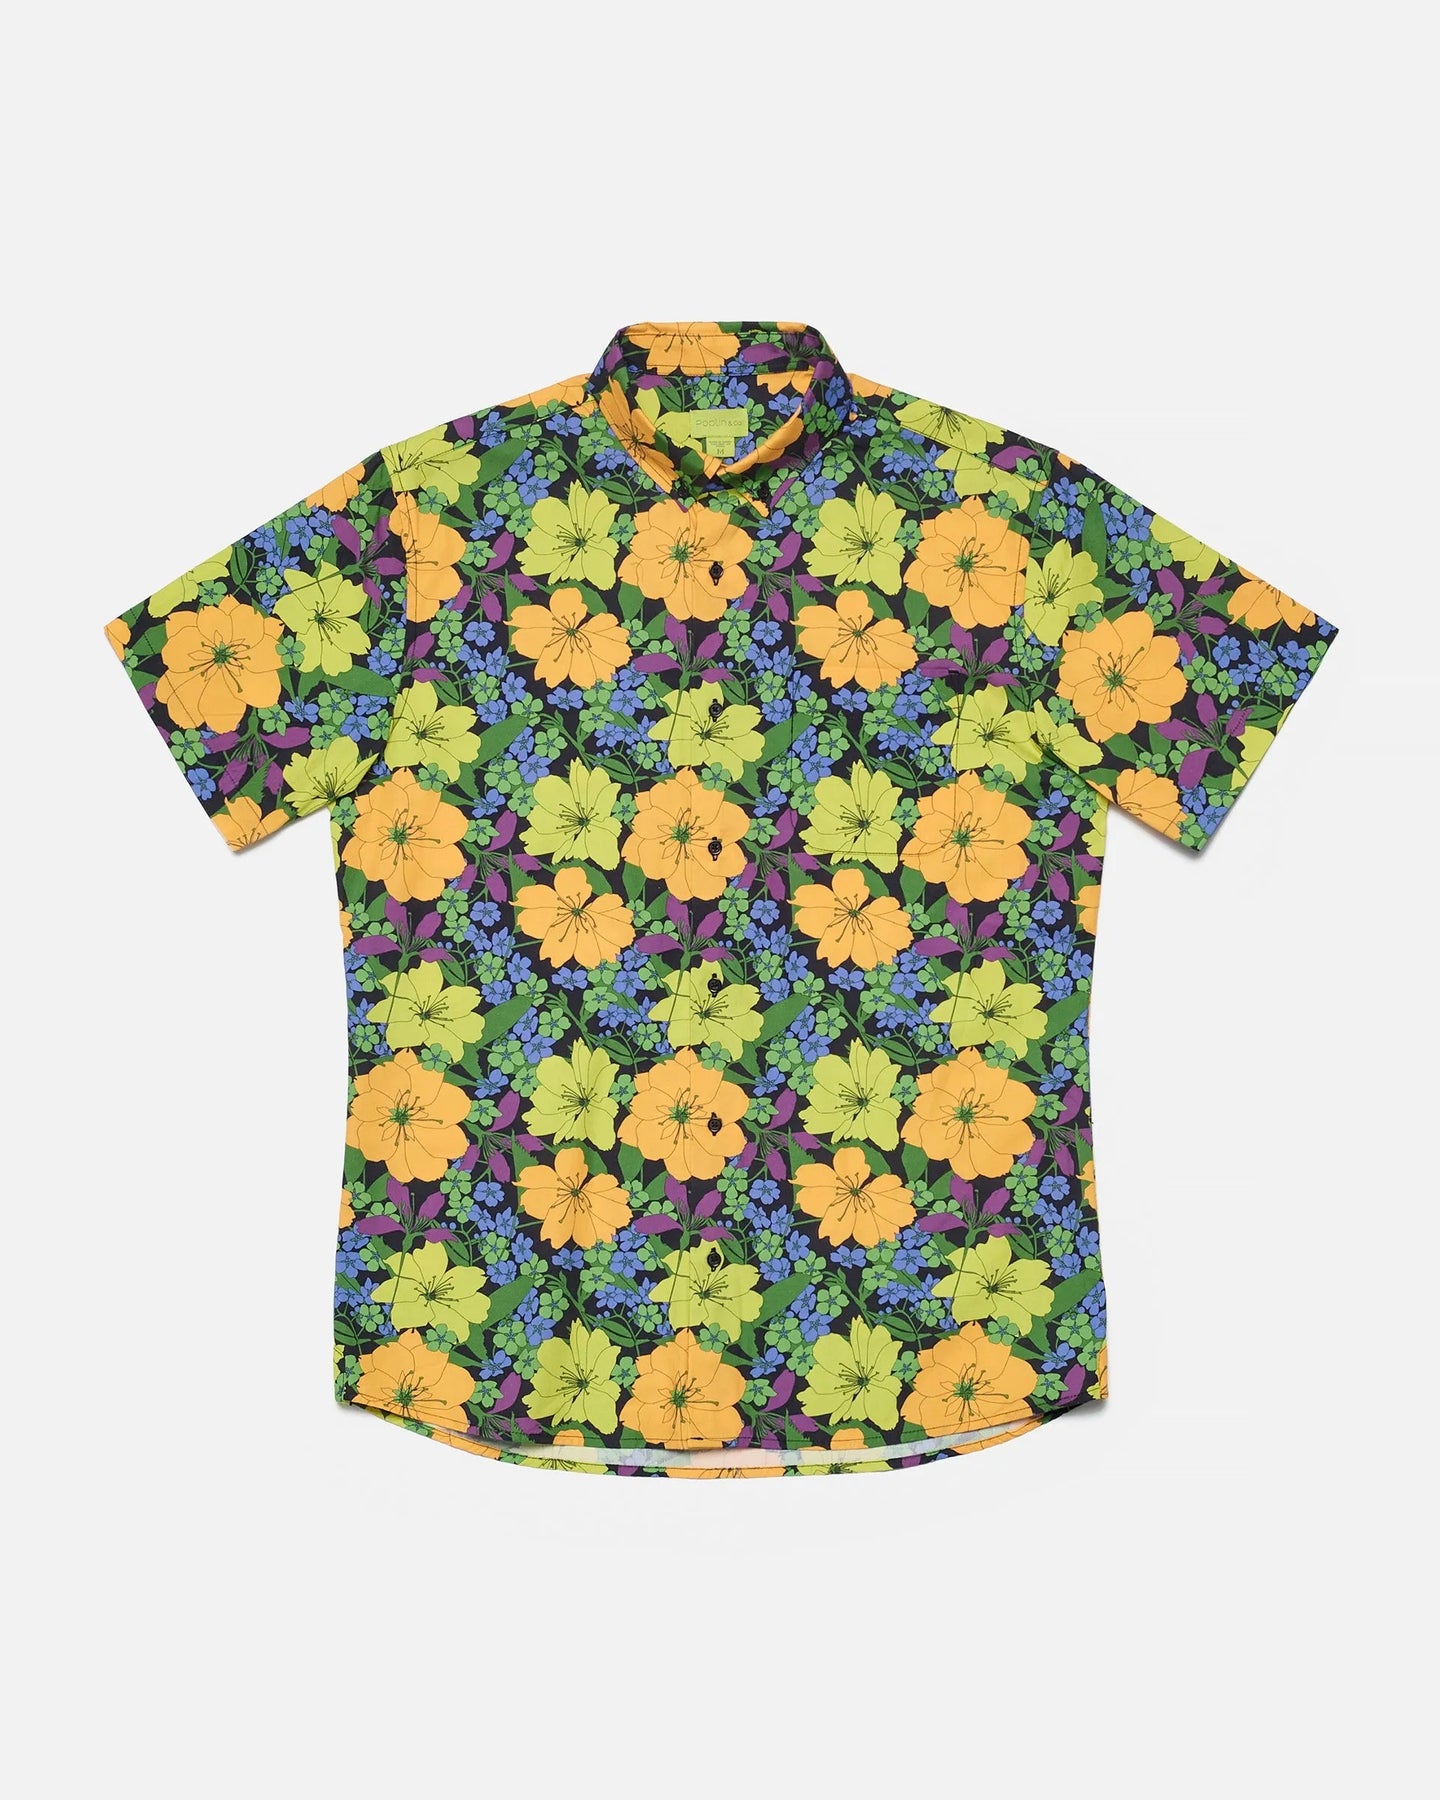 the Poplin & Co Men's Short Sleeve Printed Shirt in Tropical Floral laying flat on a white background